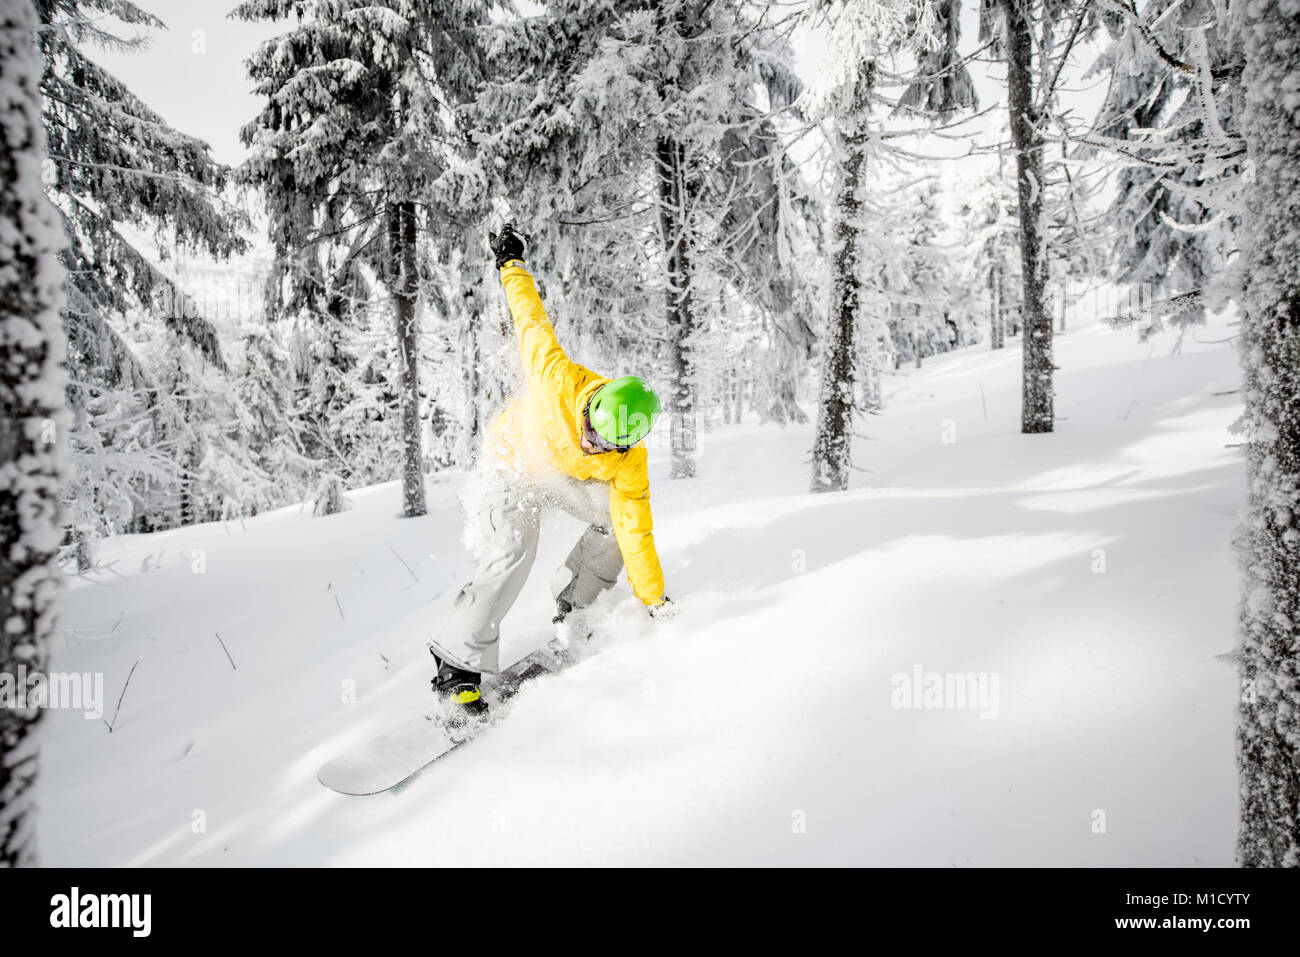 Man riding a snowboard in the snowy forest Stock Photo